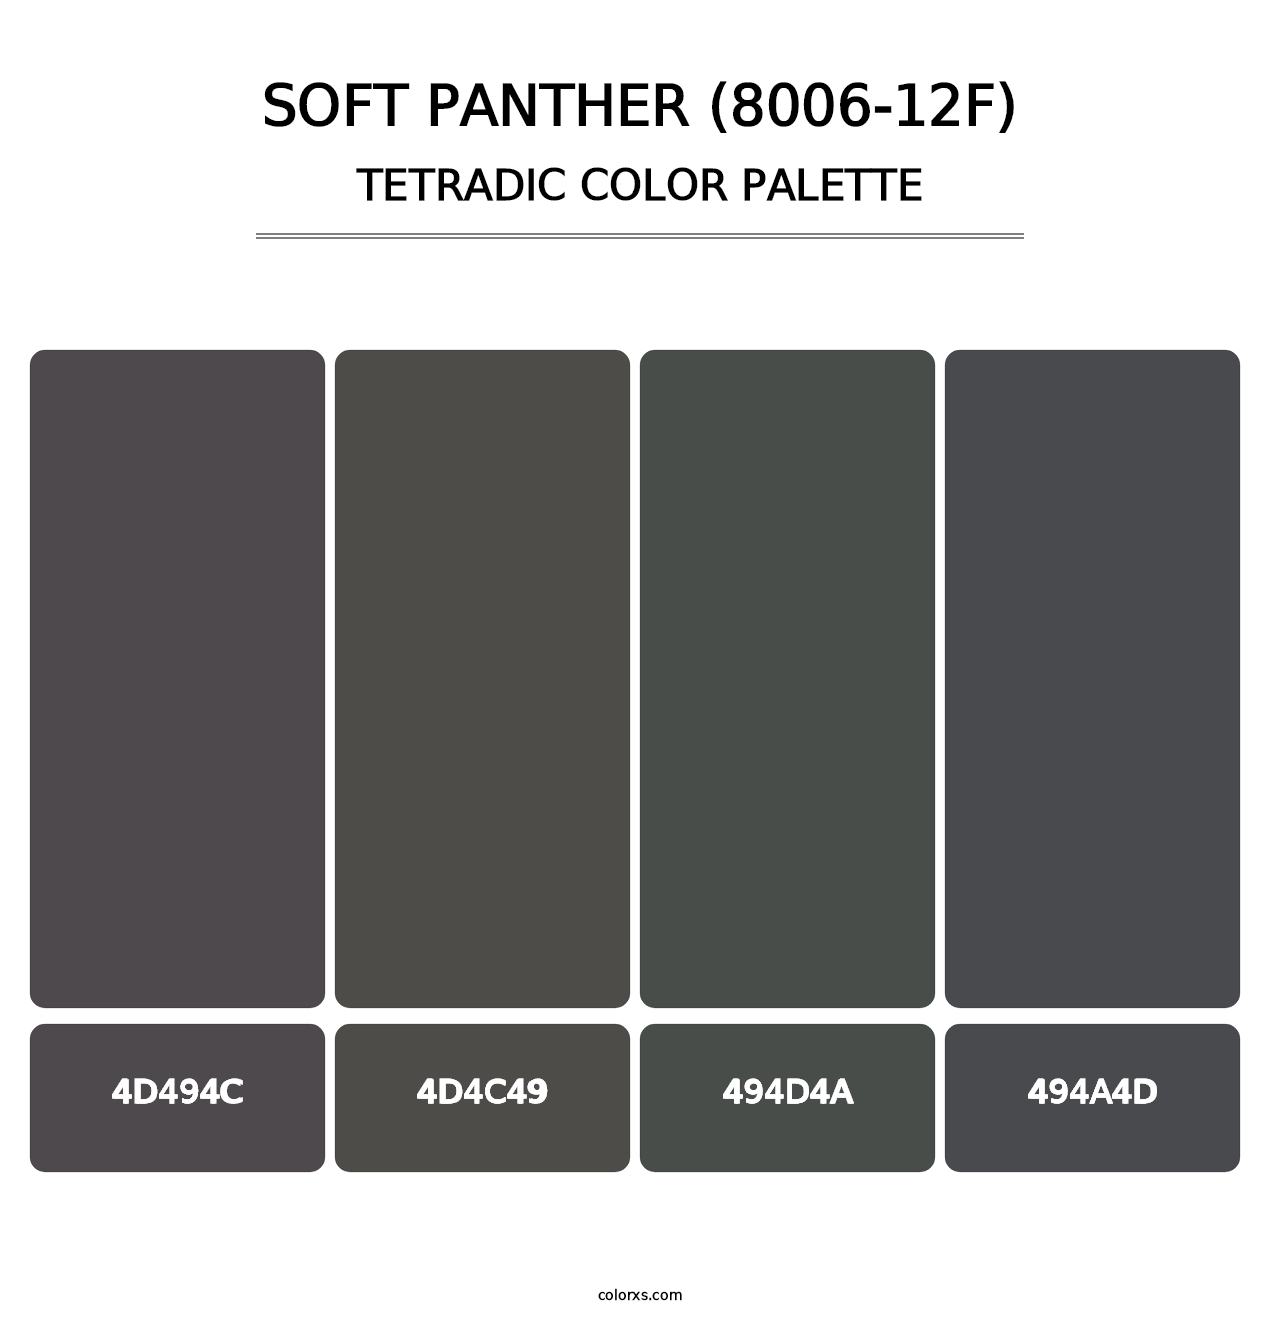 Soft Panther (8006-12F) - Tetradic Color Palette